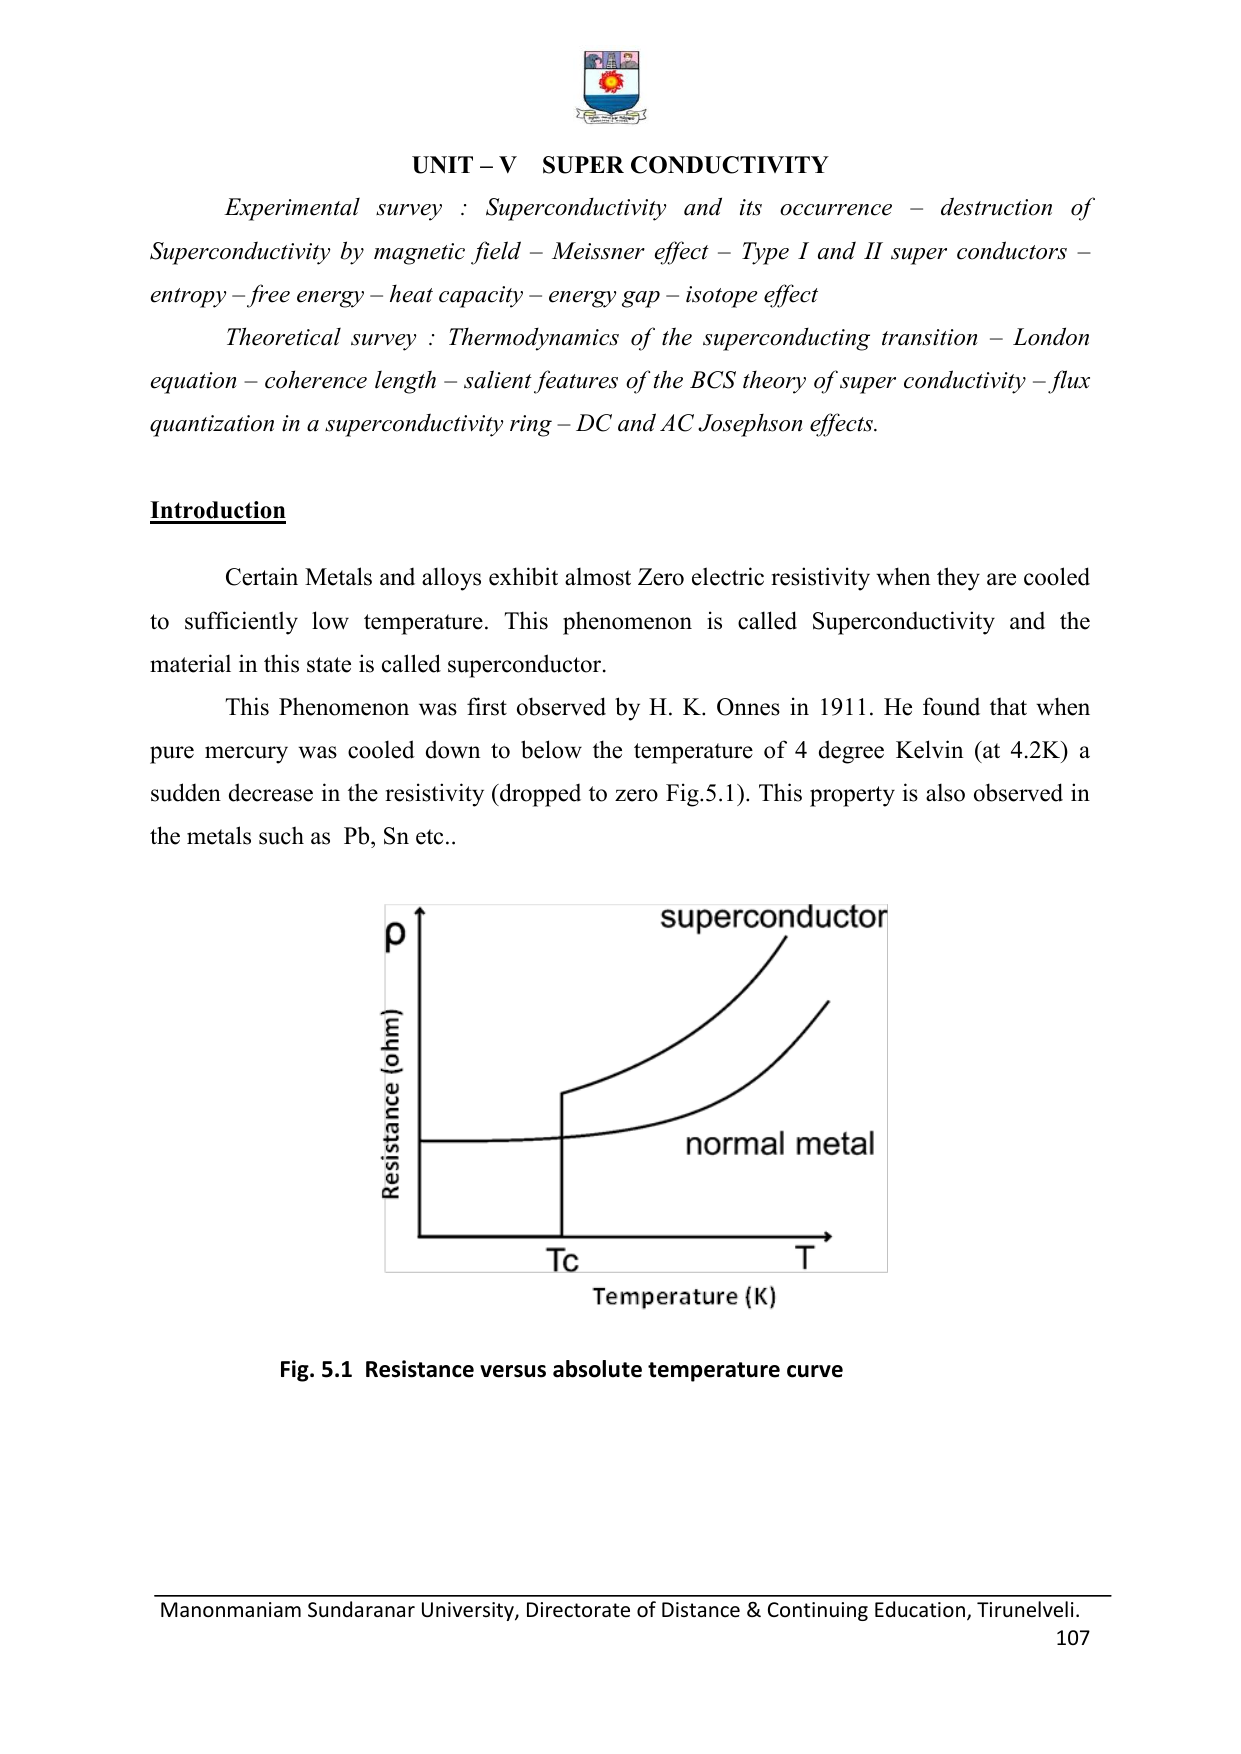 Lecture notes: Superconductivity